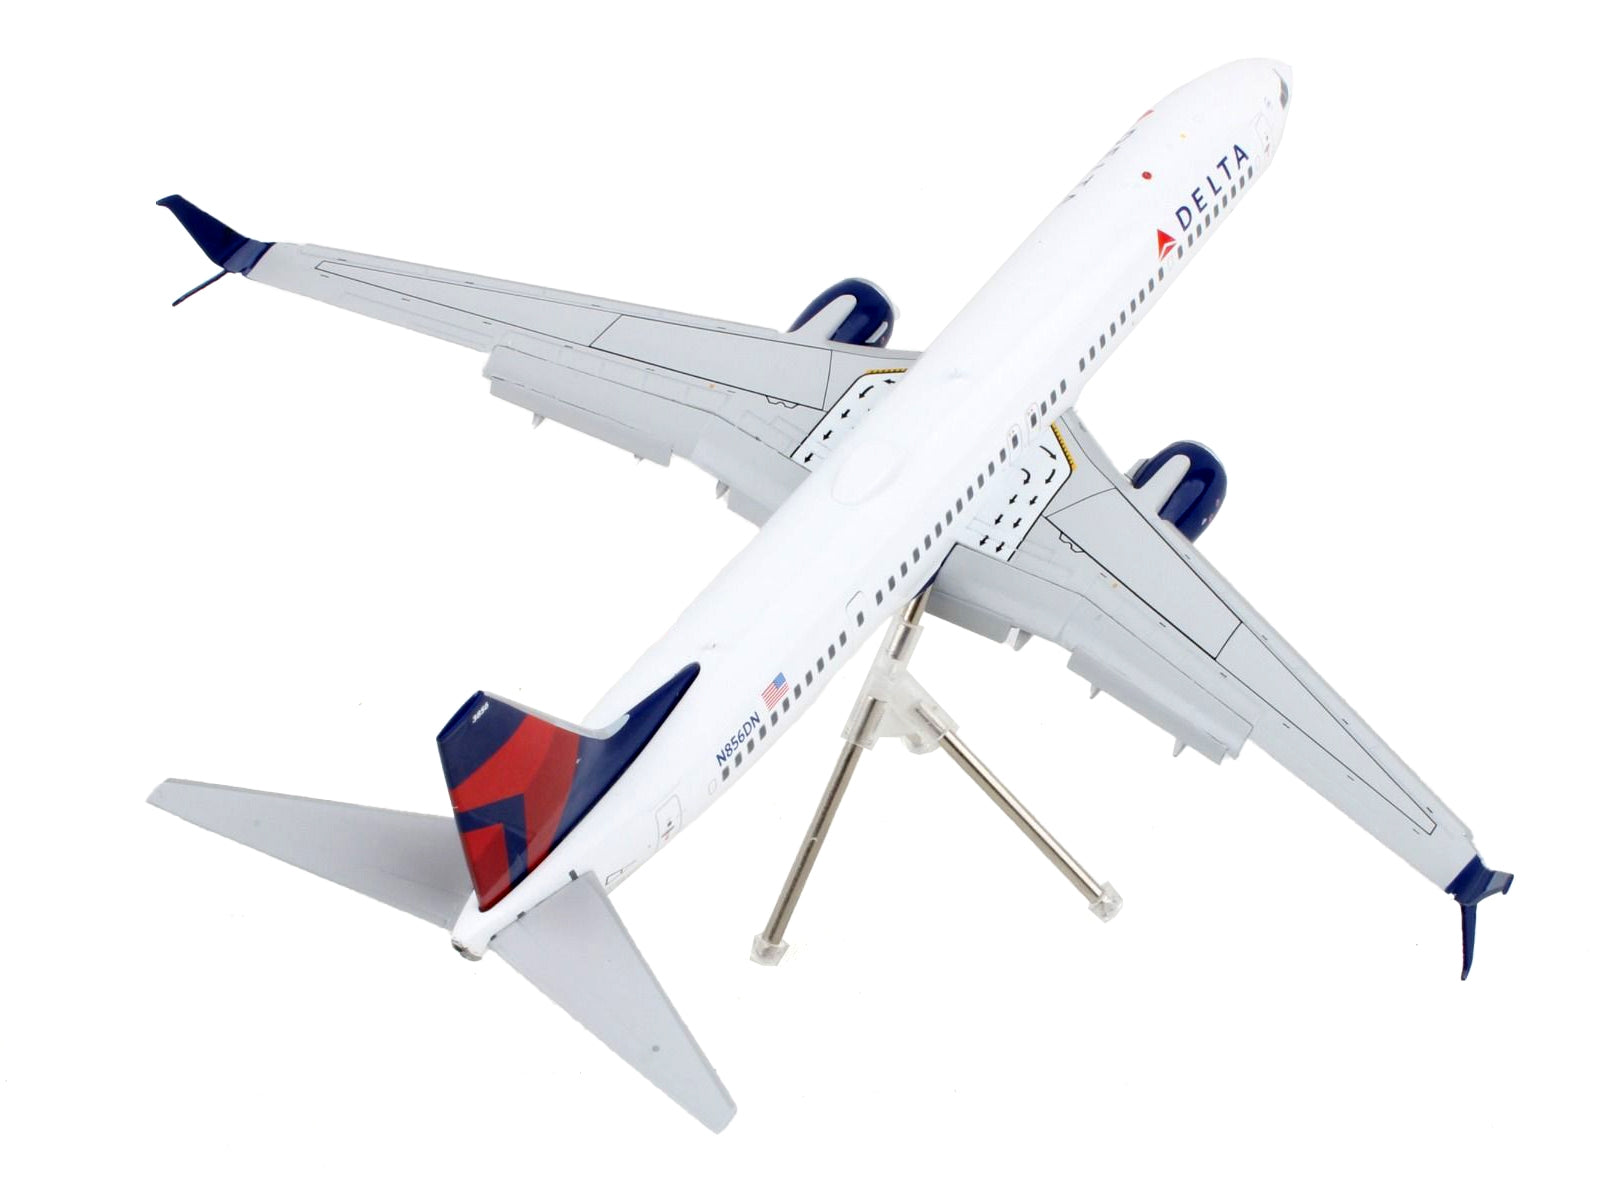 GeminiJets 1/200 Diecast: Boeing 737-900ER "Delta Air Lines" White/Blue/Red Tail with Flaps Down